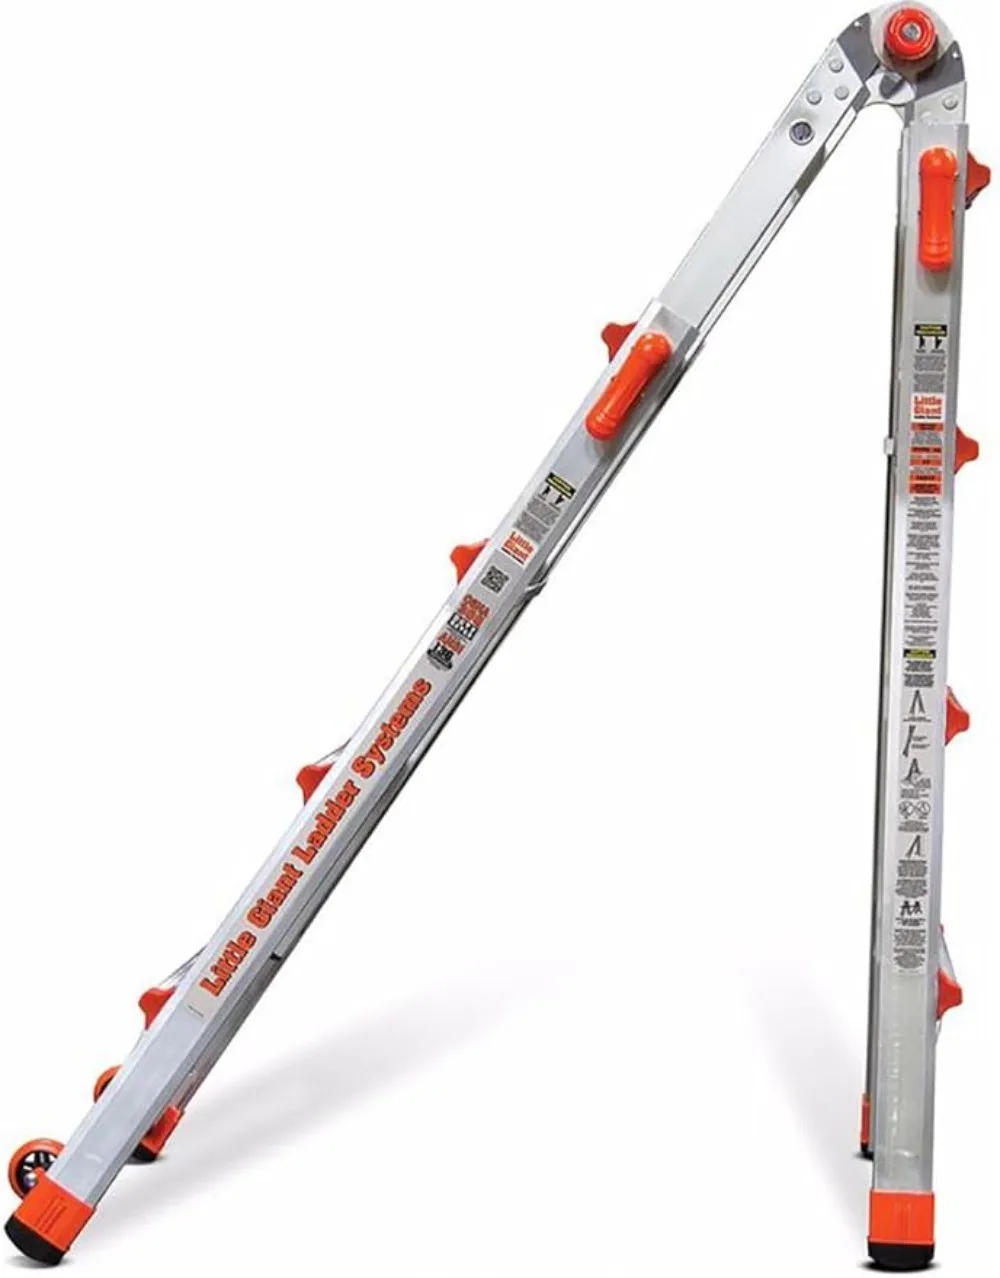 

Little Giant Ladder Systems, M22, 22 Ft, 300 lbs Weight Rating Multi-Position Ladder, Aluminum, Type 1A,Velocity with Wheels